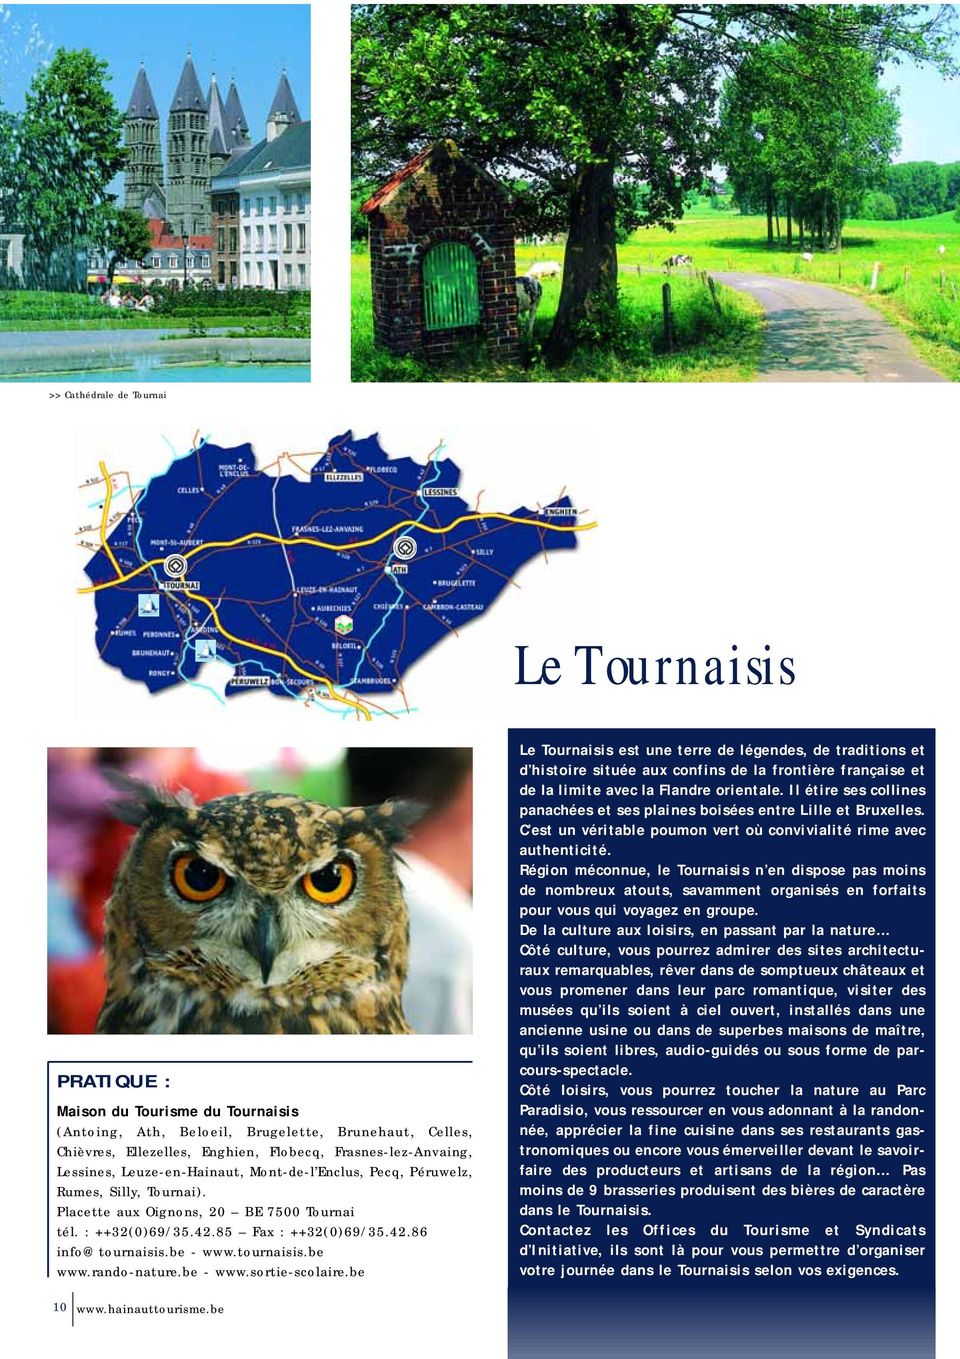 be - www.tournaisis.be www.rando-nature.be - www.sortie-scolaire.